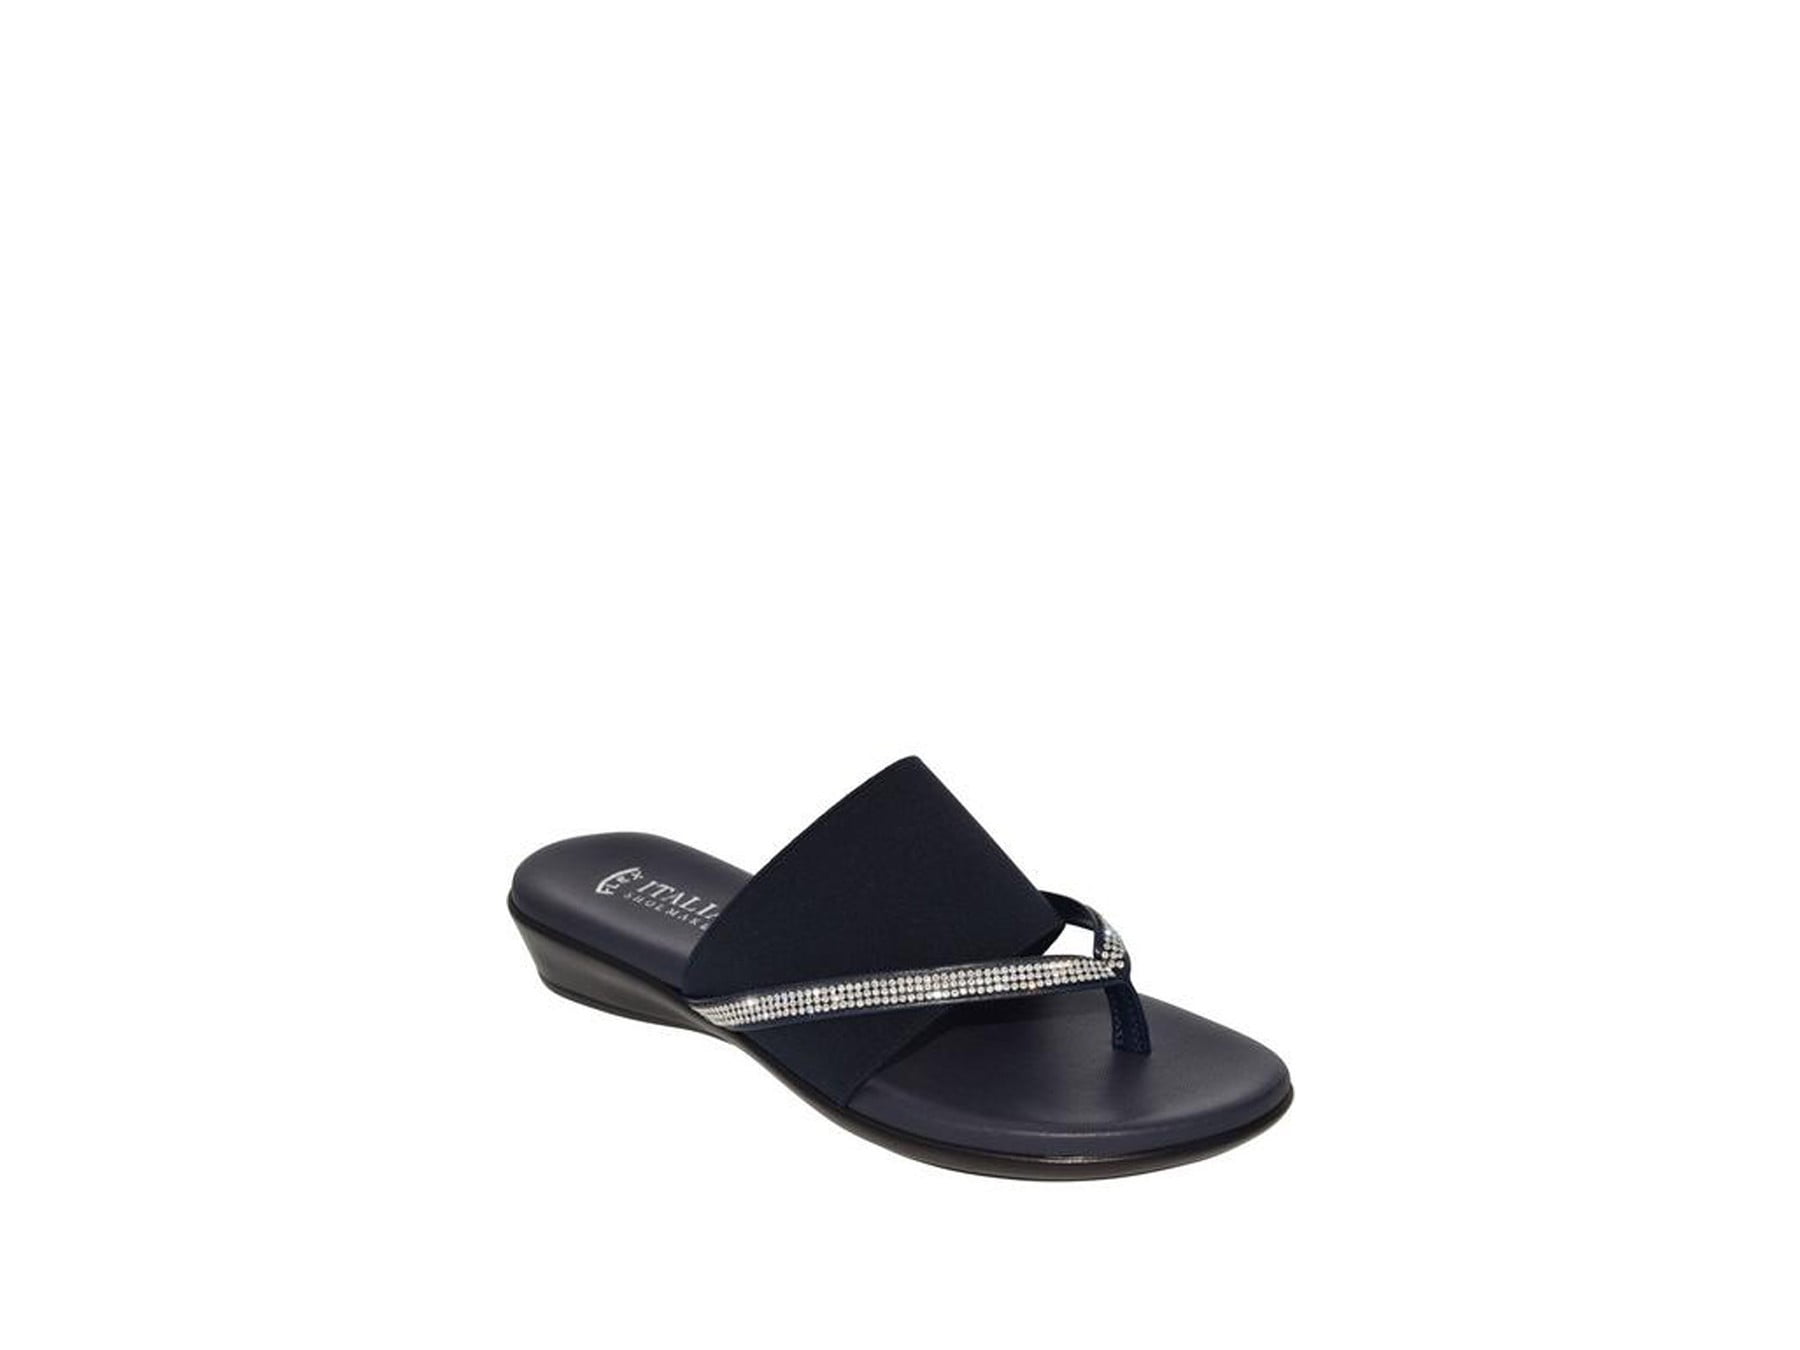 ITALIAN Shoemakers Womens Luxi Open Toe Casual Slide Sandals Navy Size 6.5 